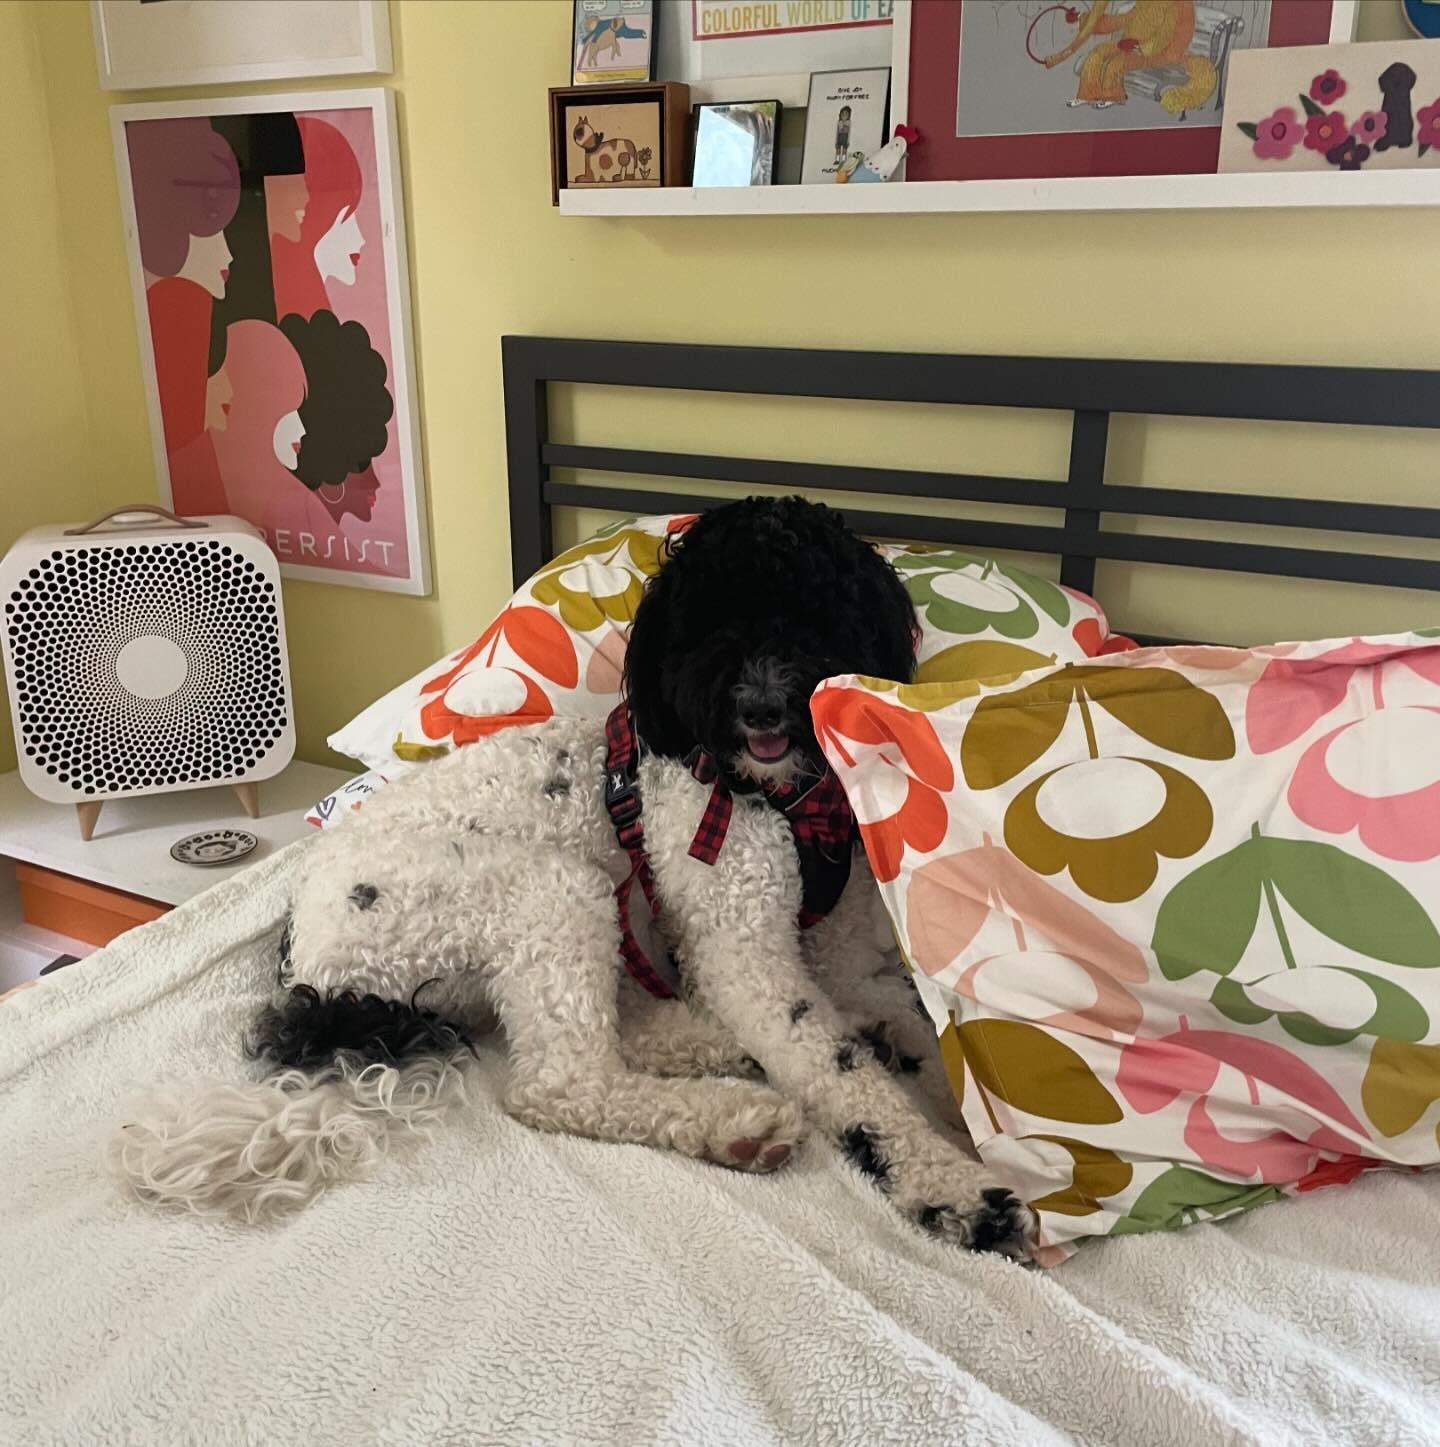 My favorite goofy wrecking ball 💥is here for the day. She&rsquo;s made herself right at home - as she does. Even goofy 😜 girl Willow is liking my new mattress. It&rsquo;s a good mattress. 😊👍🏻🐩🐕&zwj;🦺🤍🖤🐄 #labradoodlesofinstagram #petsitters